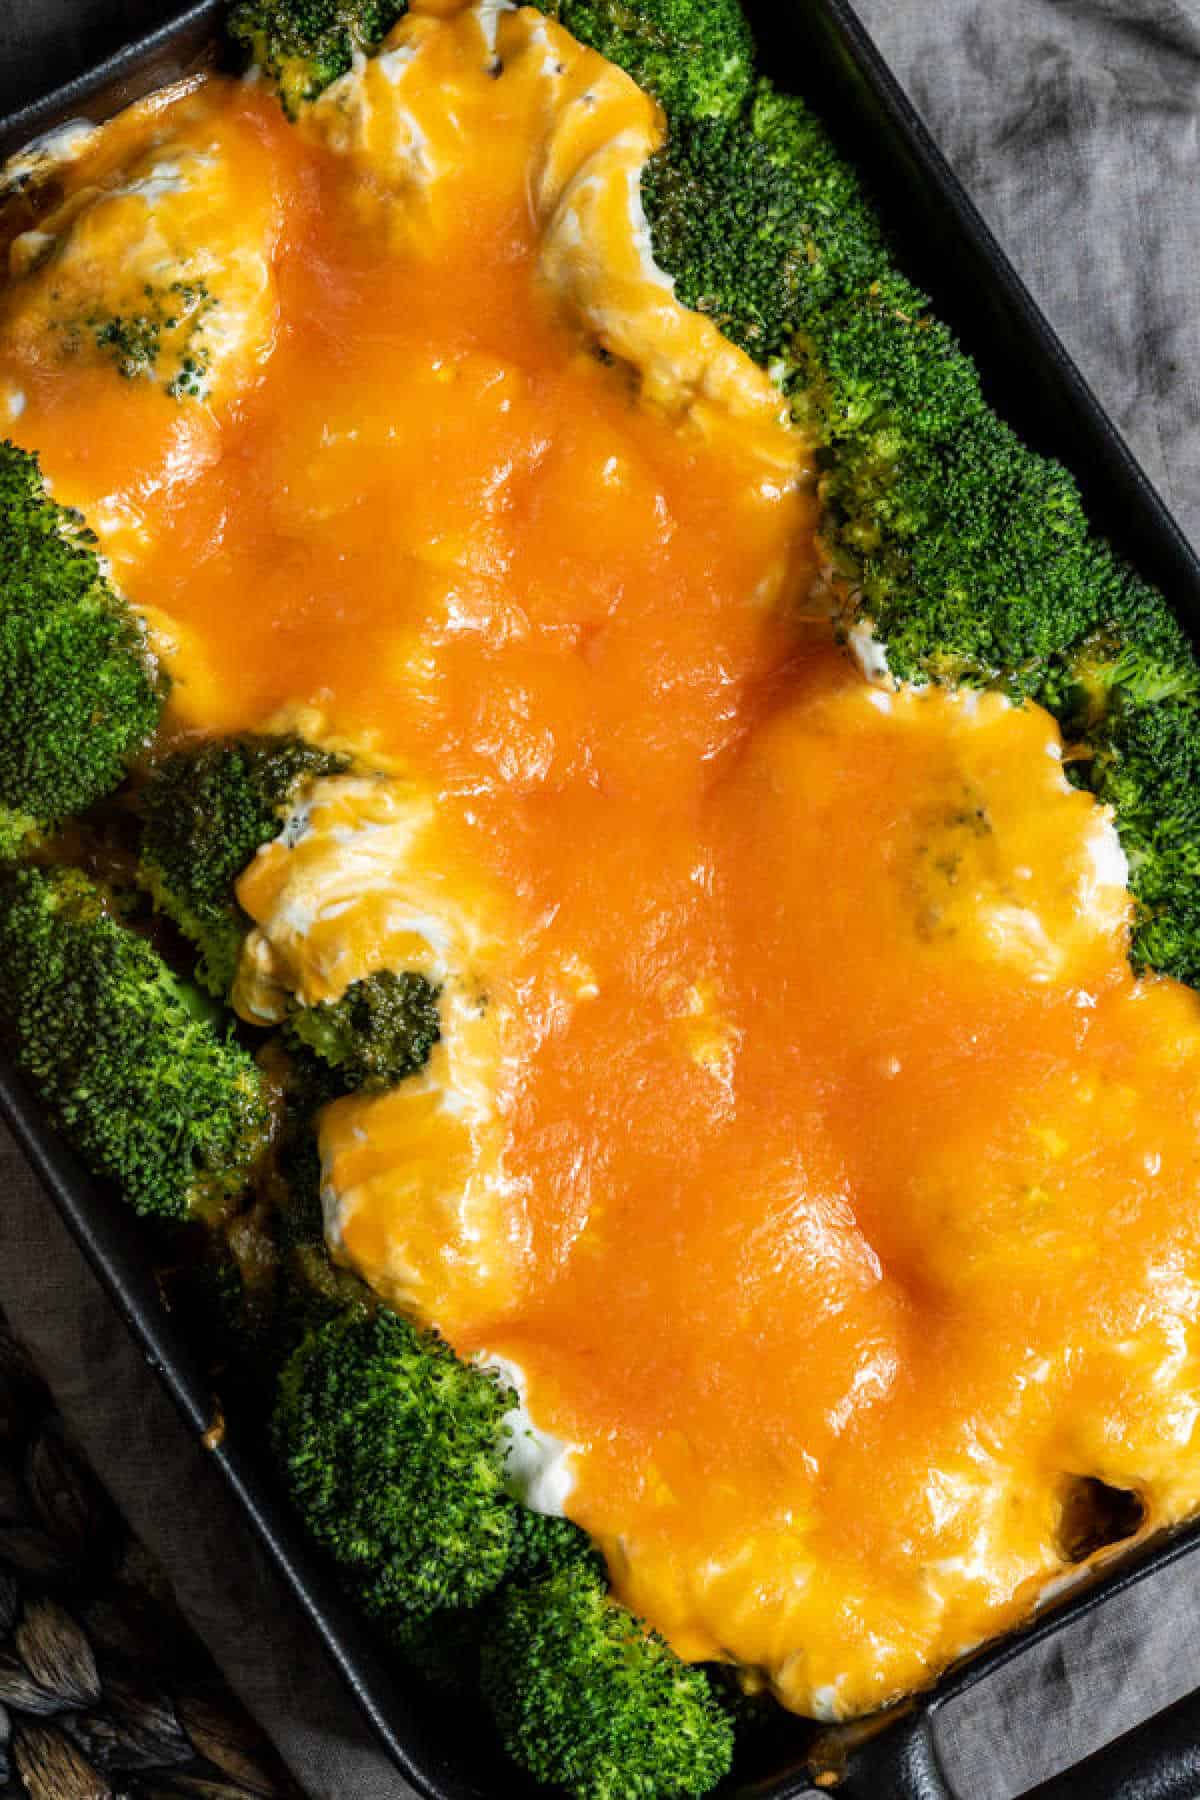 Broccoli Cheese Casserole topped with cheddar cheese